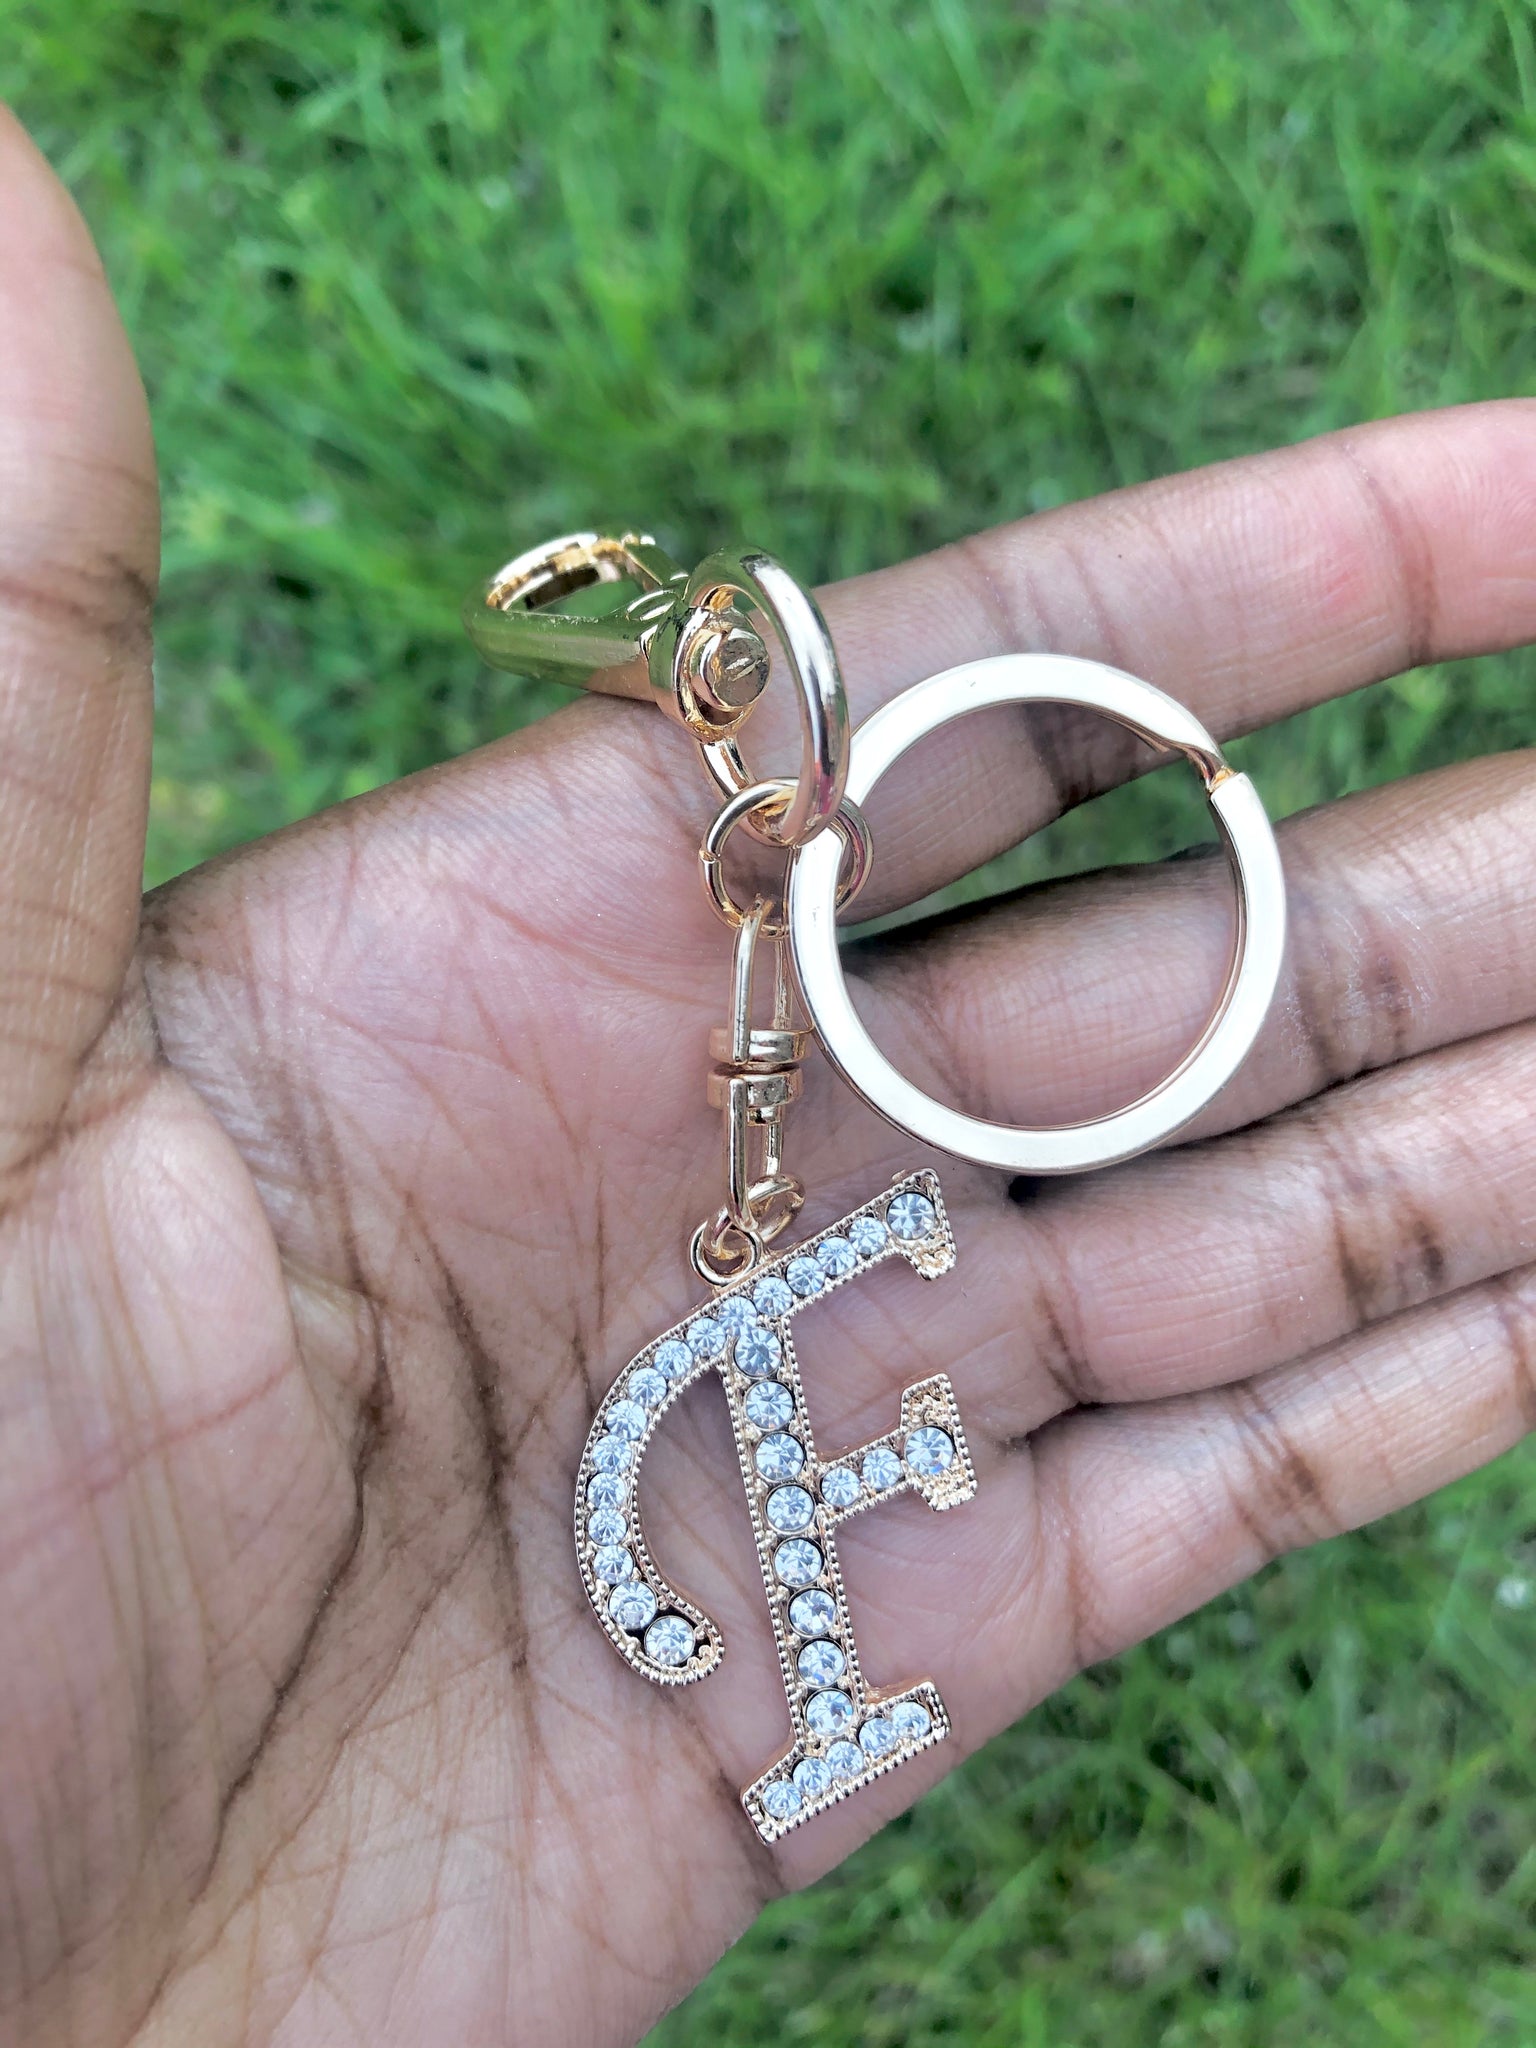 Letter Keychain With Lip Gloss 